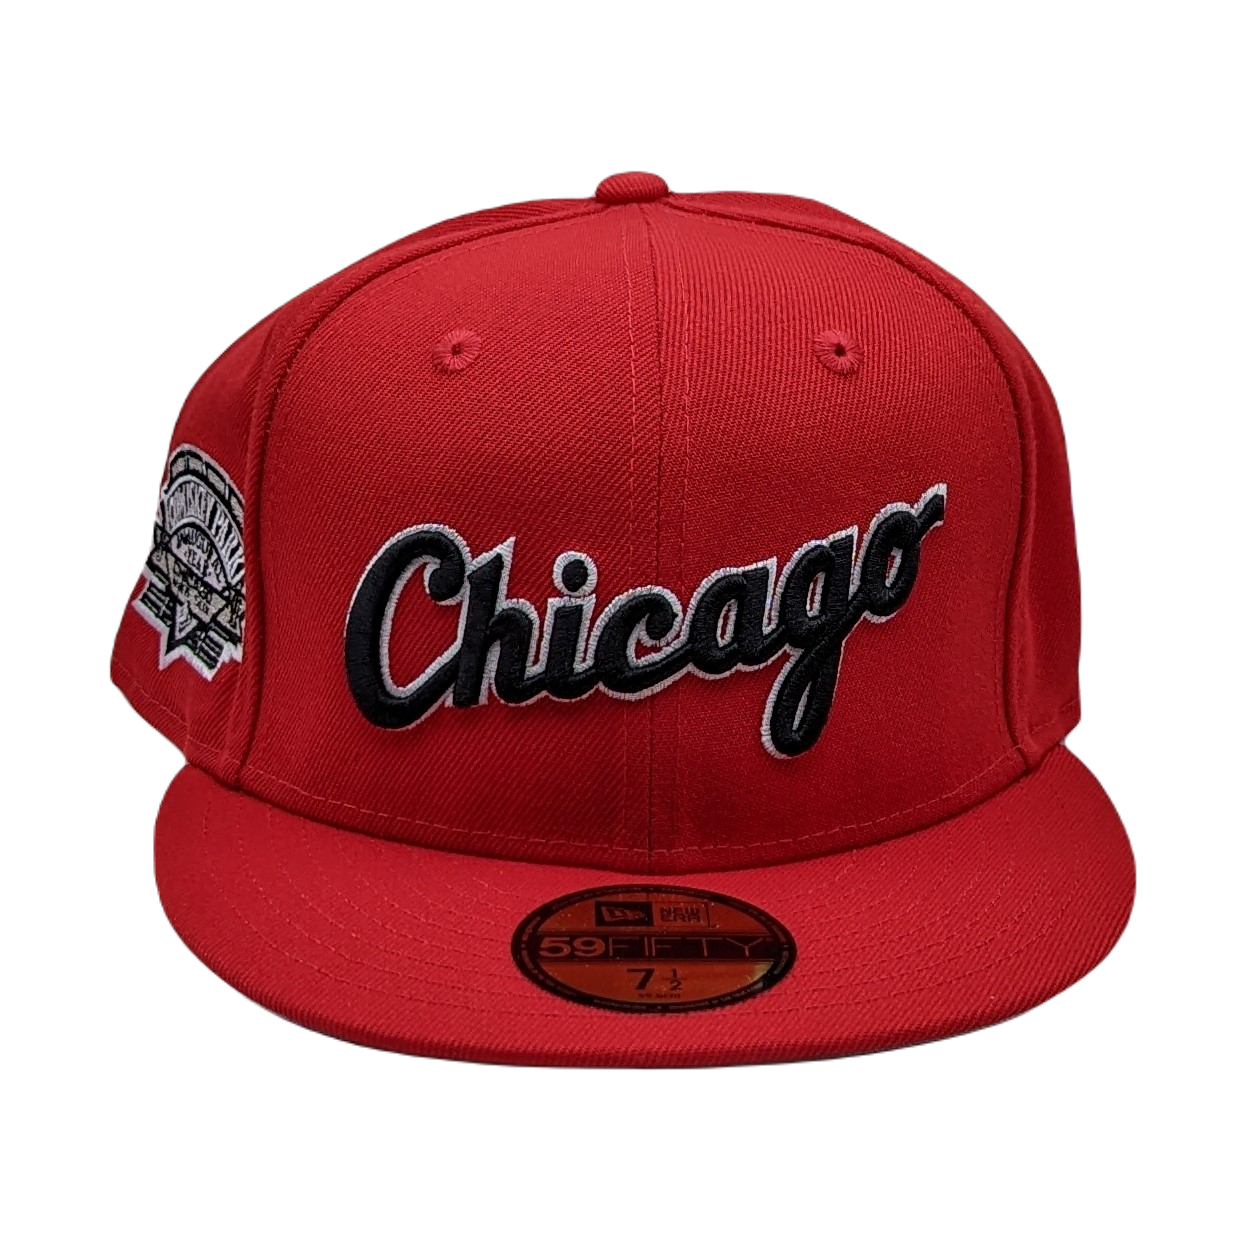 New Era 59Fifty Chicago White Sox Comiskey Park Inaugural Year Patch Fitted Hat